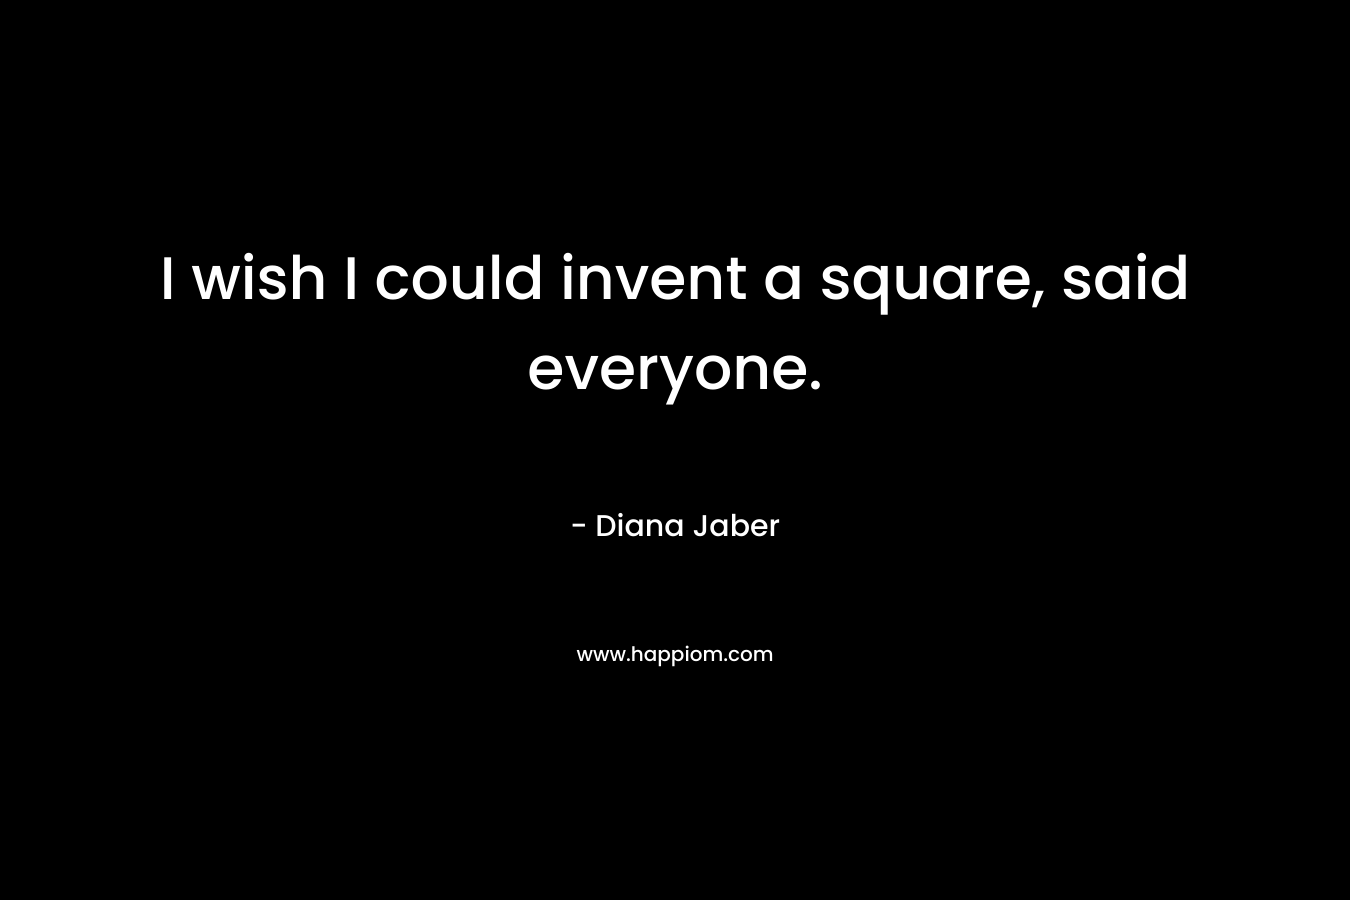 I wish I could invent a square, said everyone.